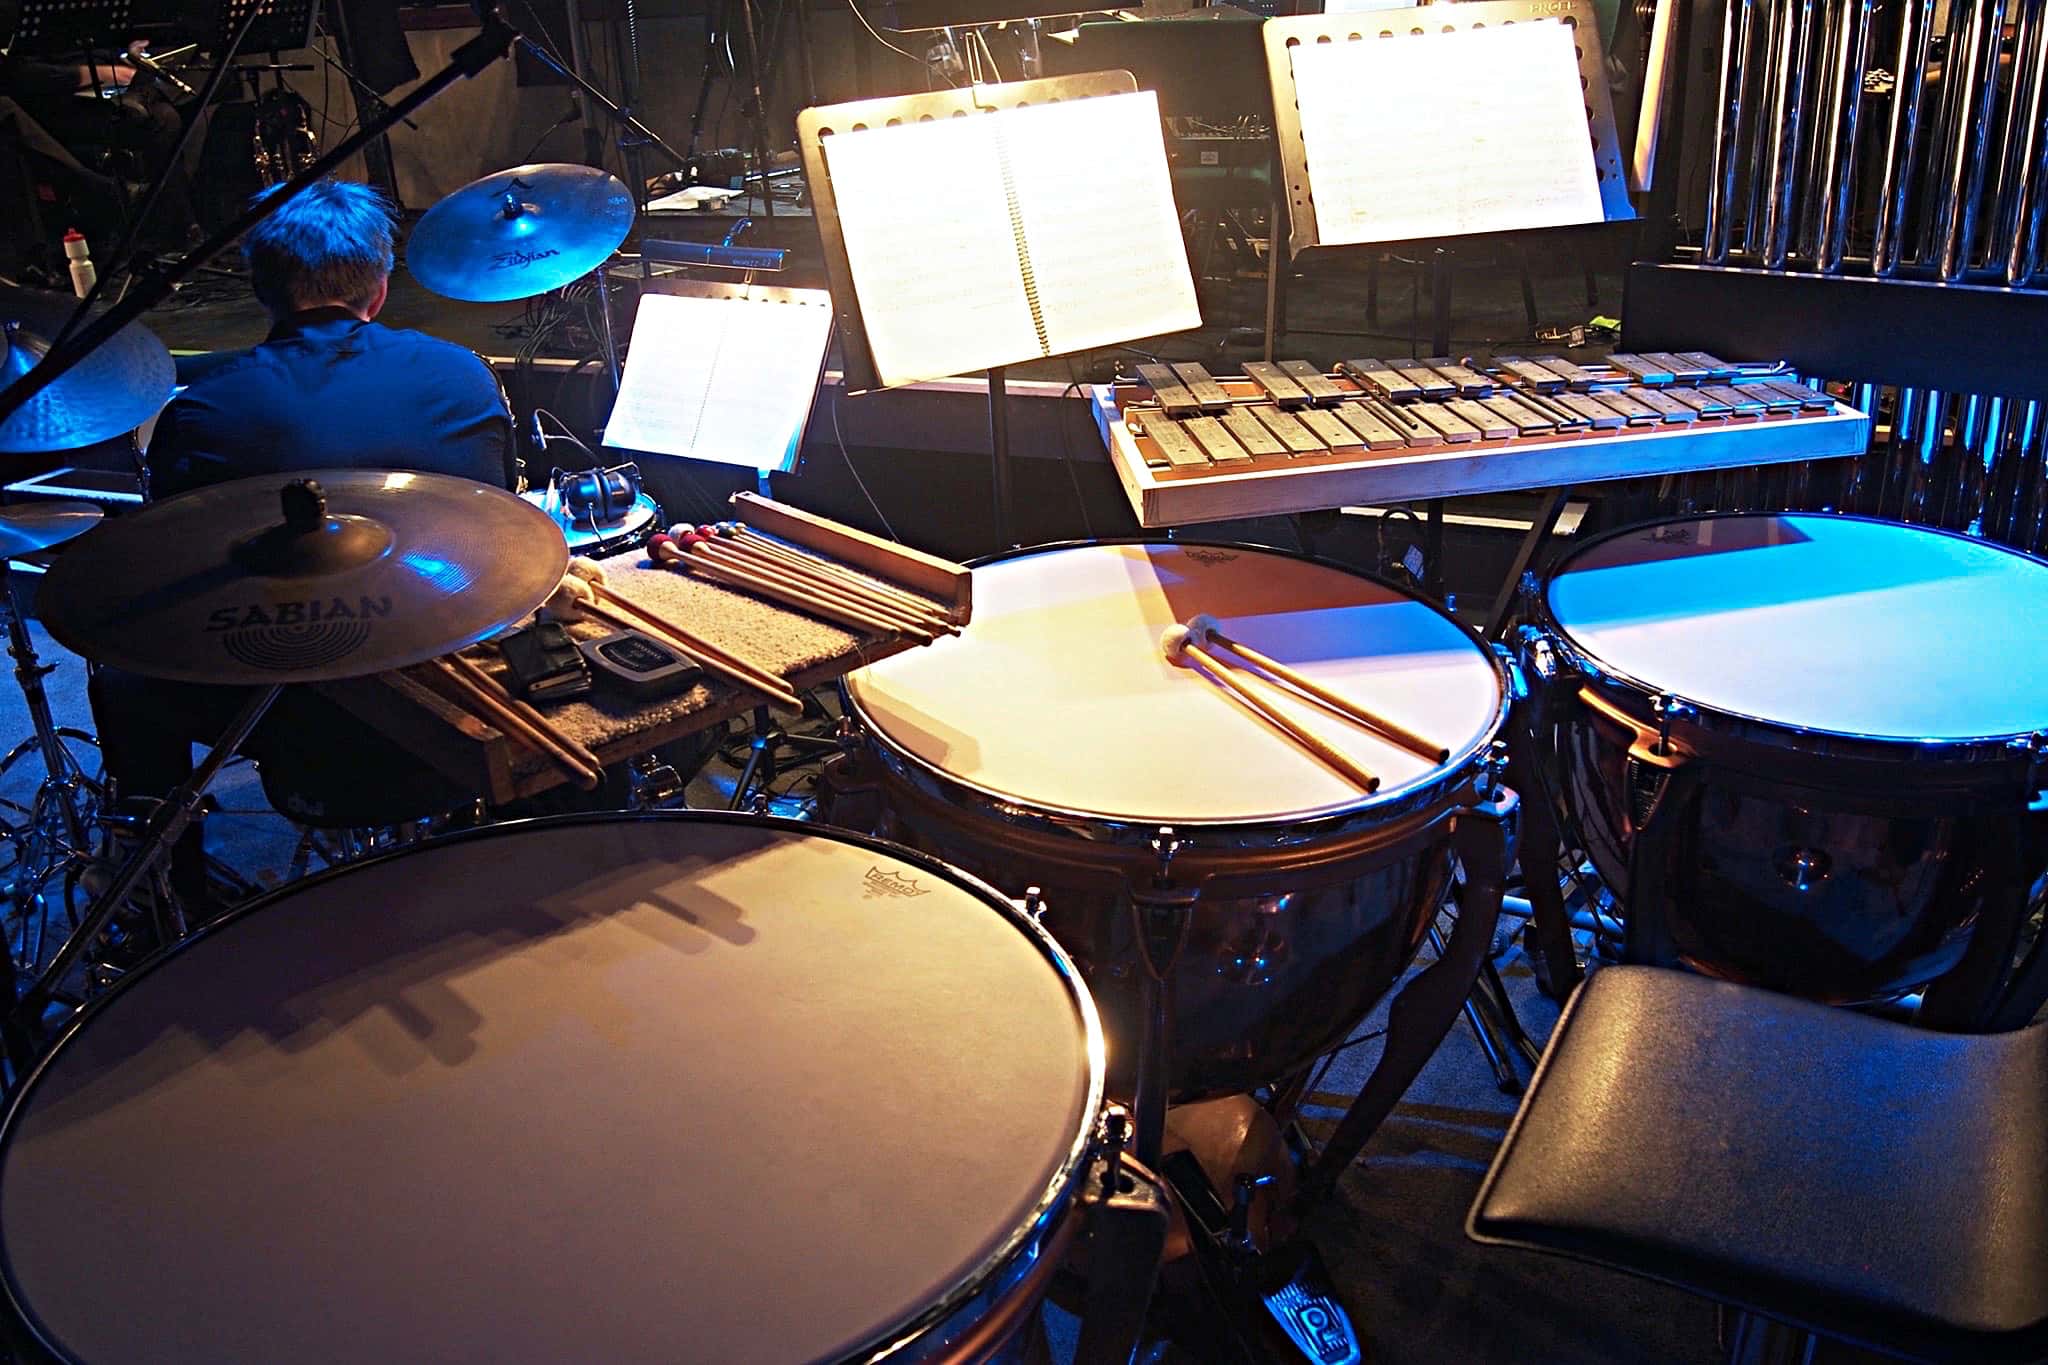 Craig Given's percussion setup for Hairspray at the Isaac Theatre Royal in Christchurch, New Zealand, for Showbiz Christchurch.